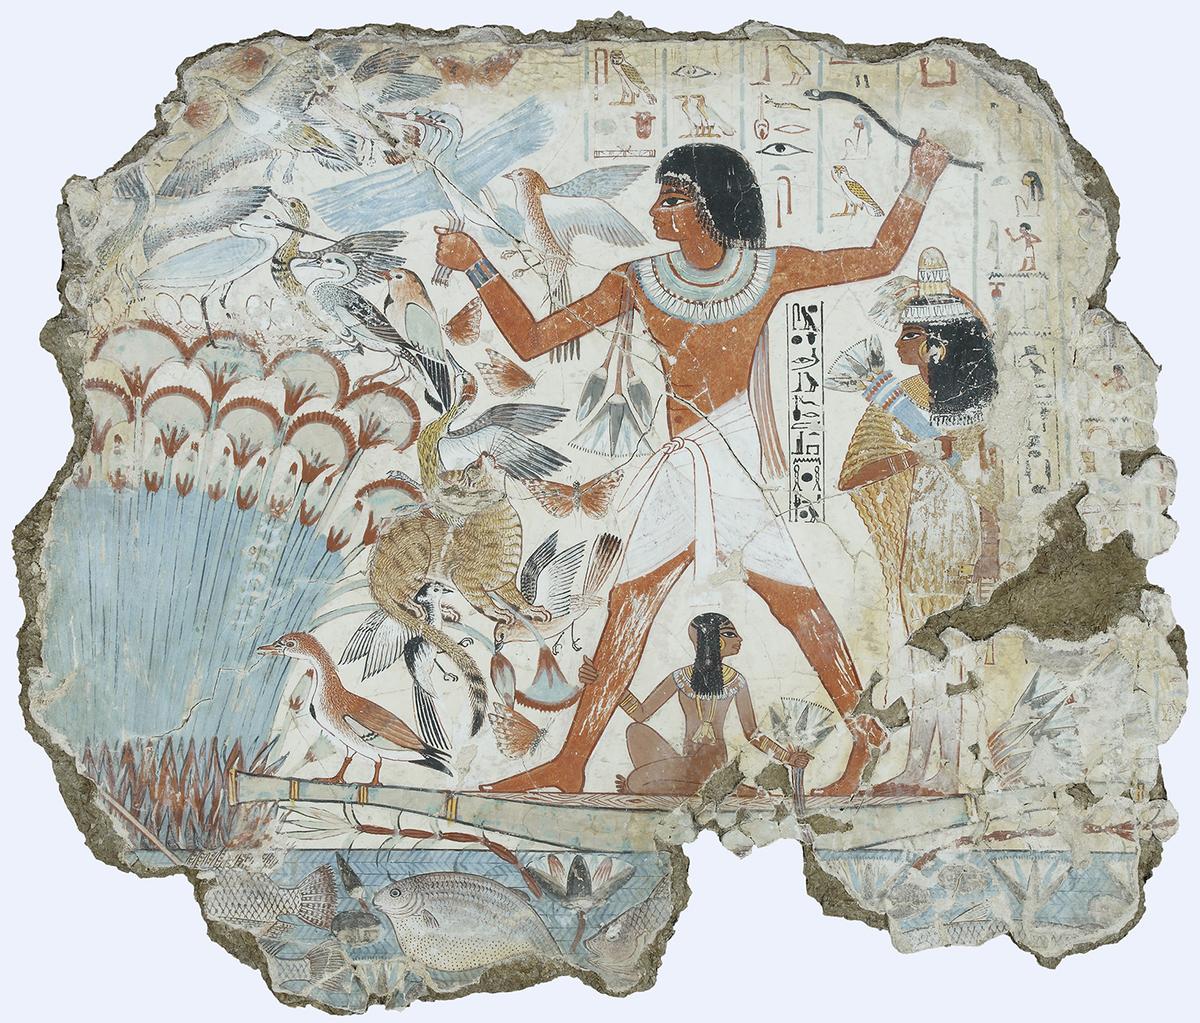 A fragment of a polychrome tomb-painting "Nebamun goes Hunting," circa 1350 B.C., in the West Bank of Luxor, Egypt. Plaster; 38.6 inches by 45.3 inches. The British Museum, London. (PD-US)